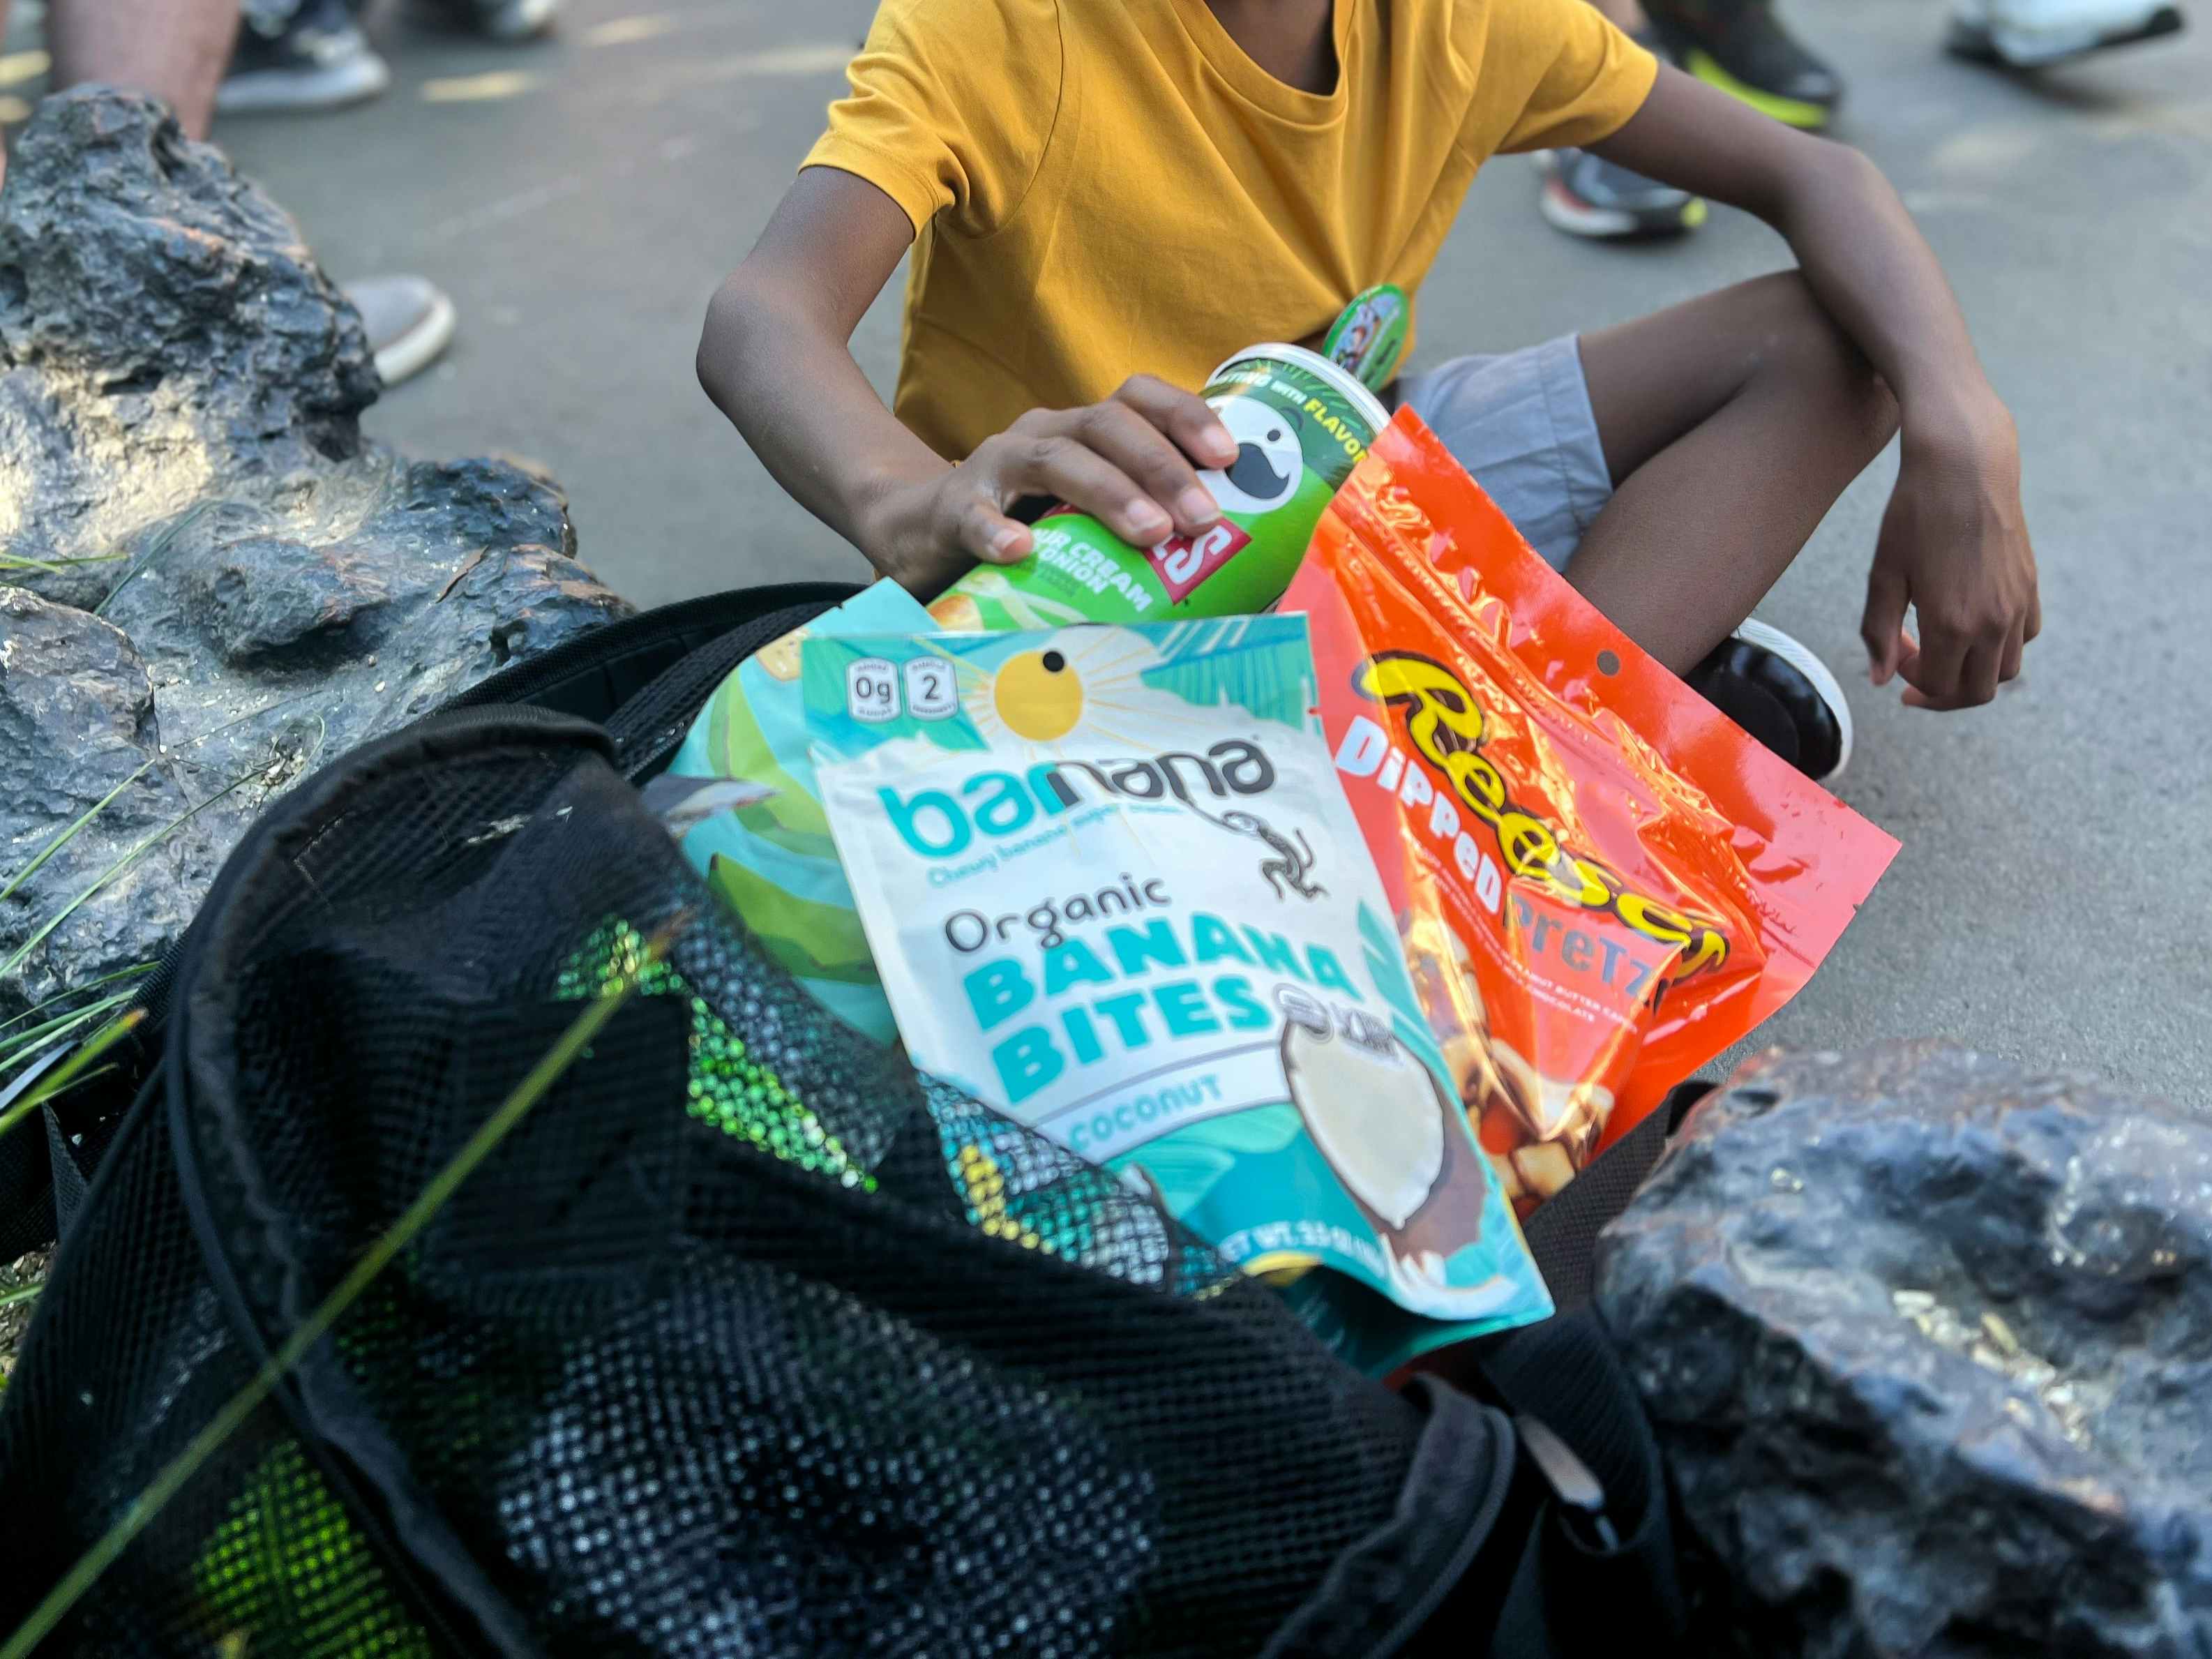 A young boy grabbing snacks out of a bag brought into a theme park